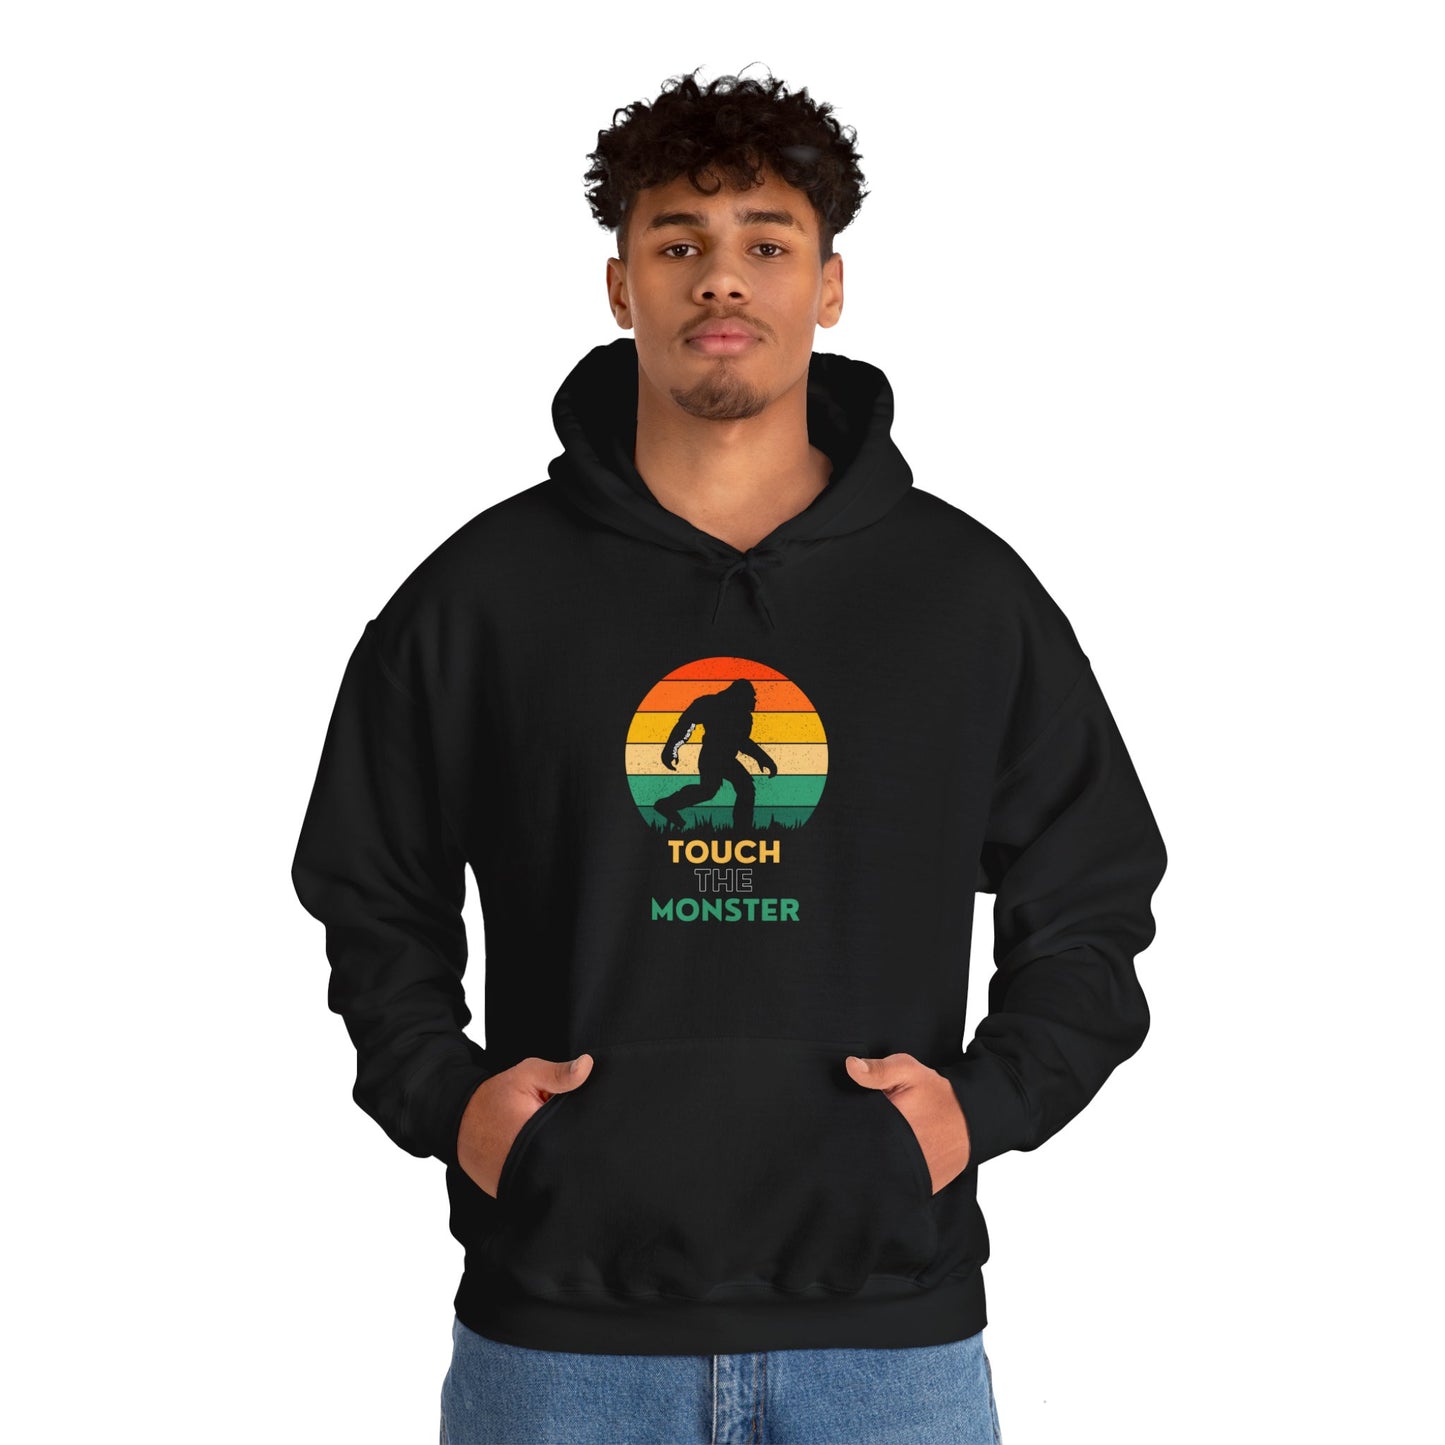 'Touch the Monster' Unisex Heavy Blend™ Hooded Sweatshirt